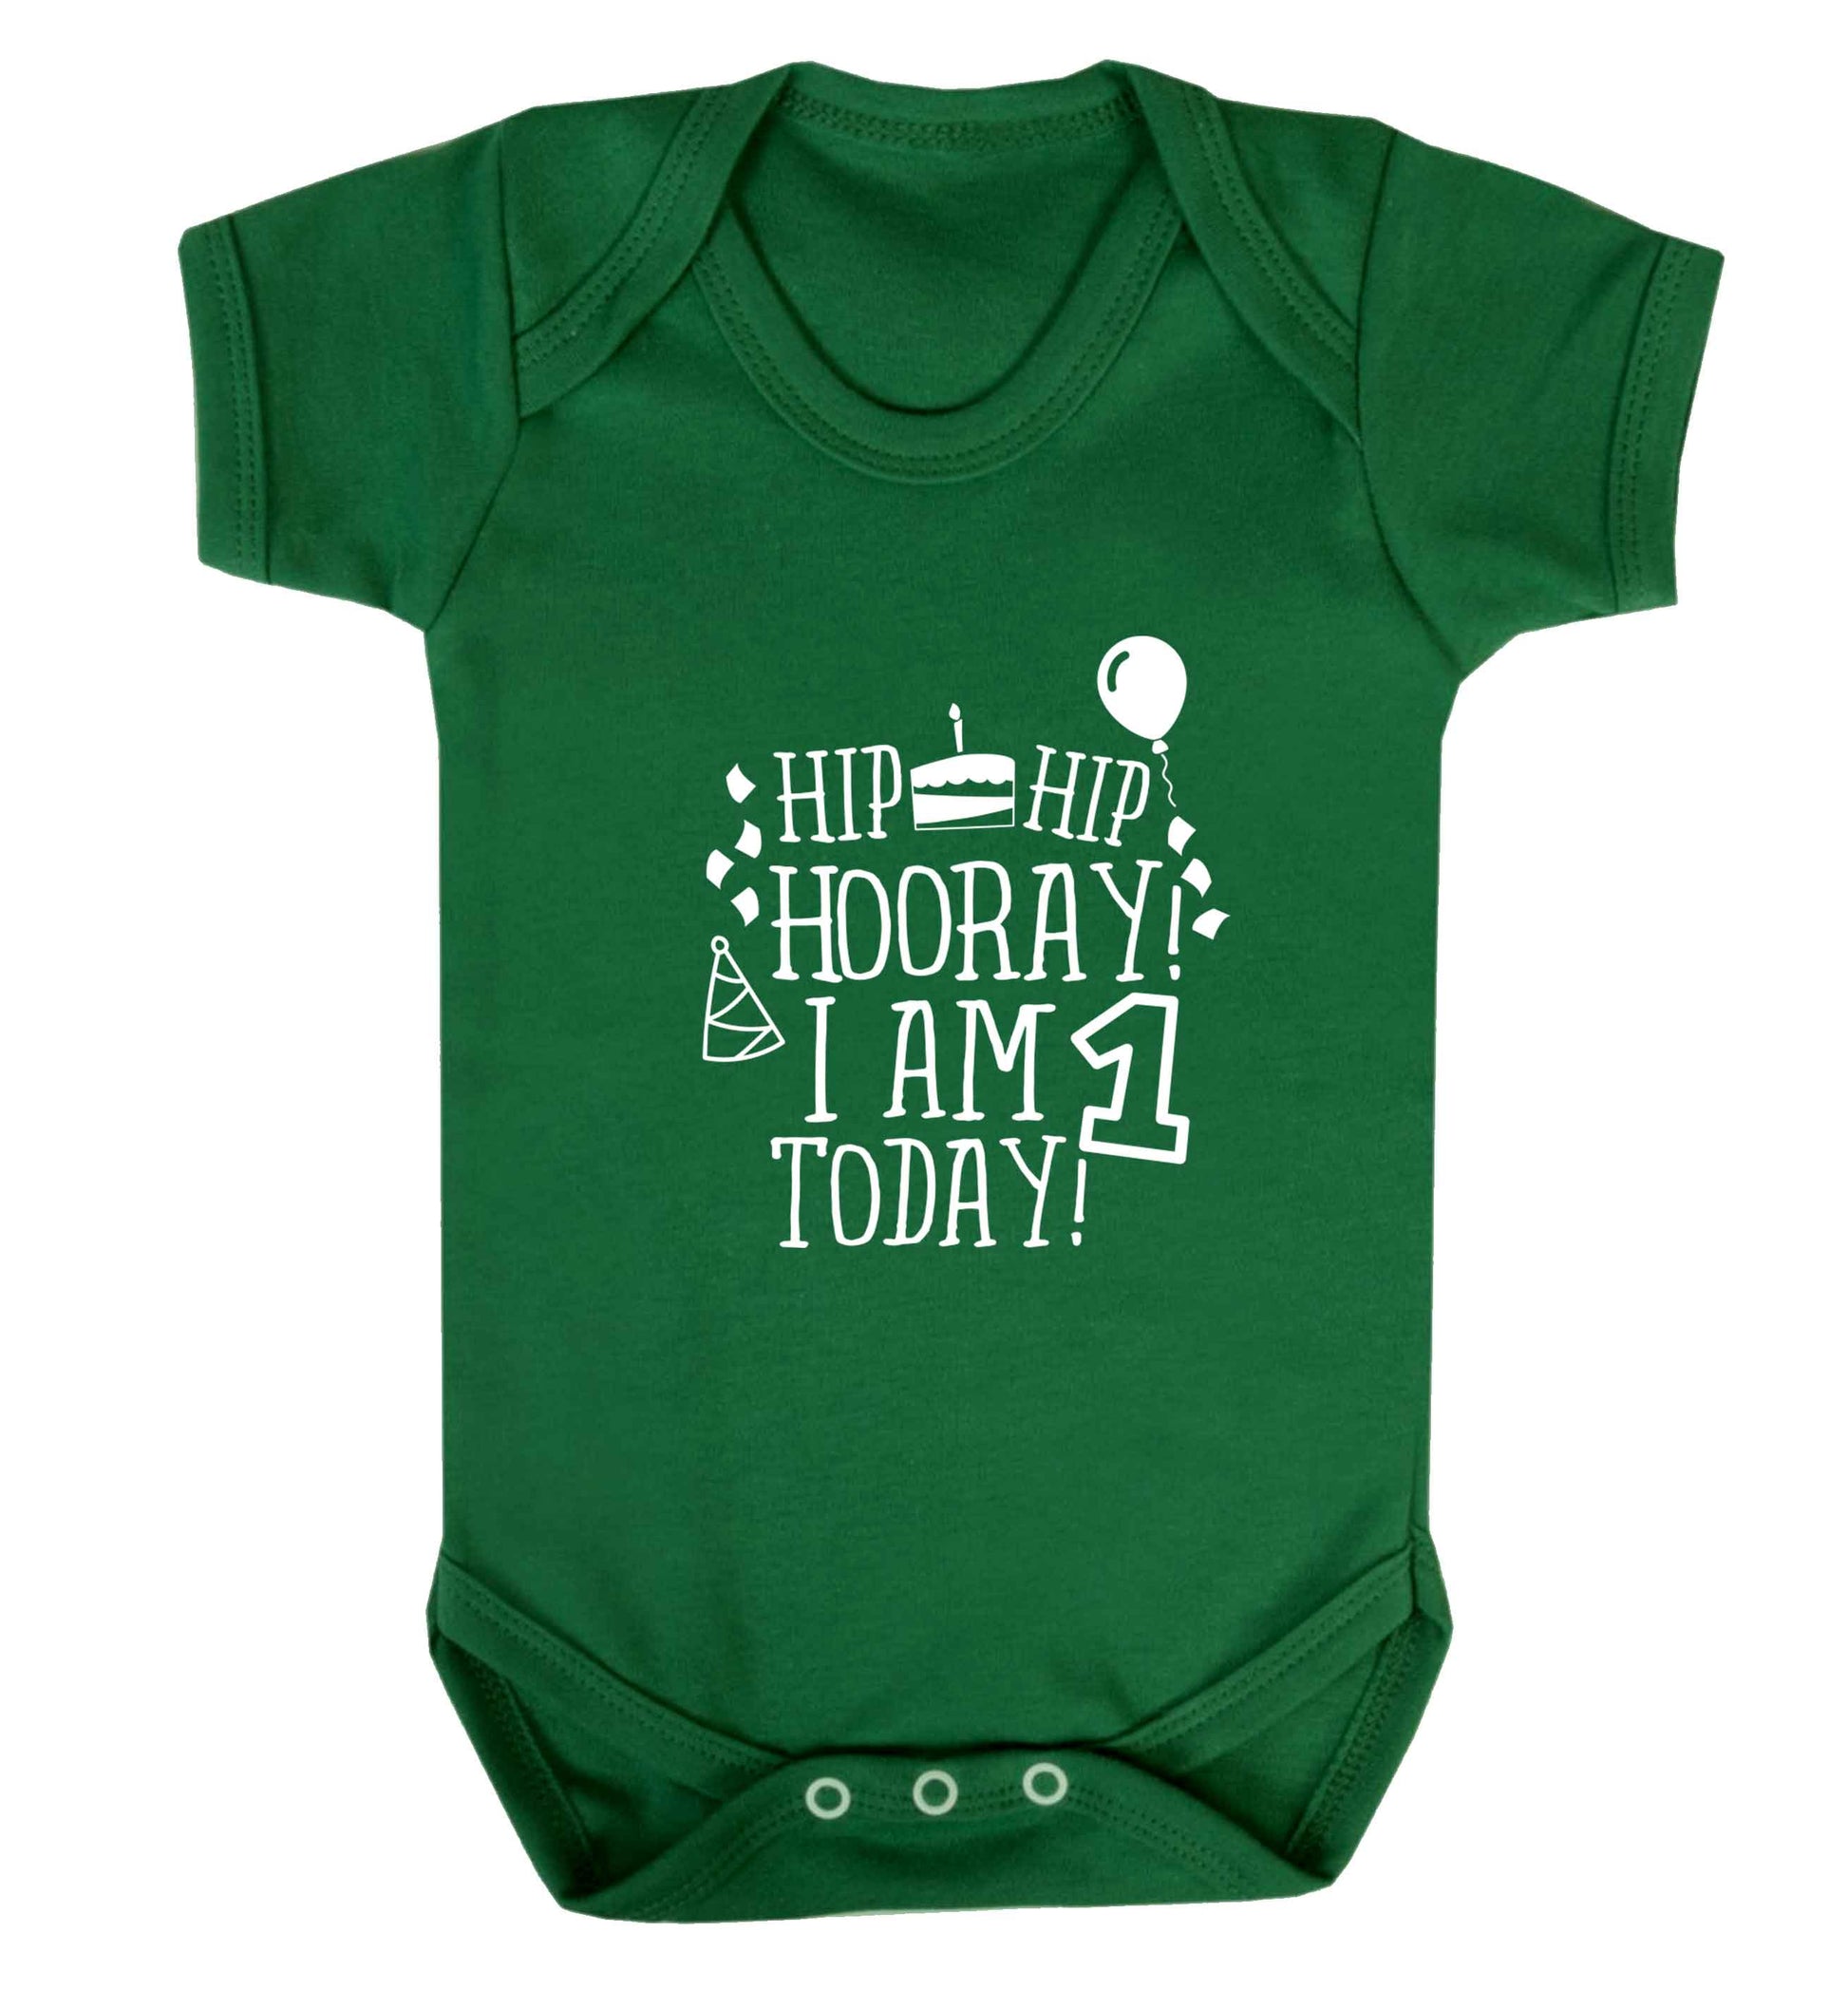 I am One Today baby vest green 18-24 months